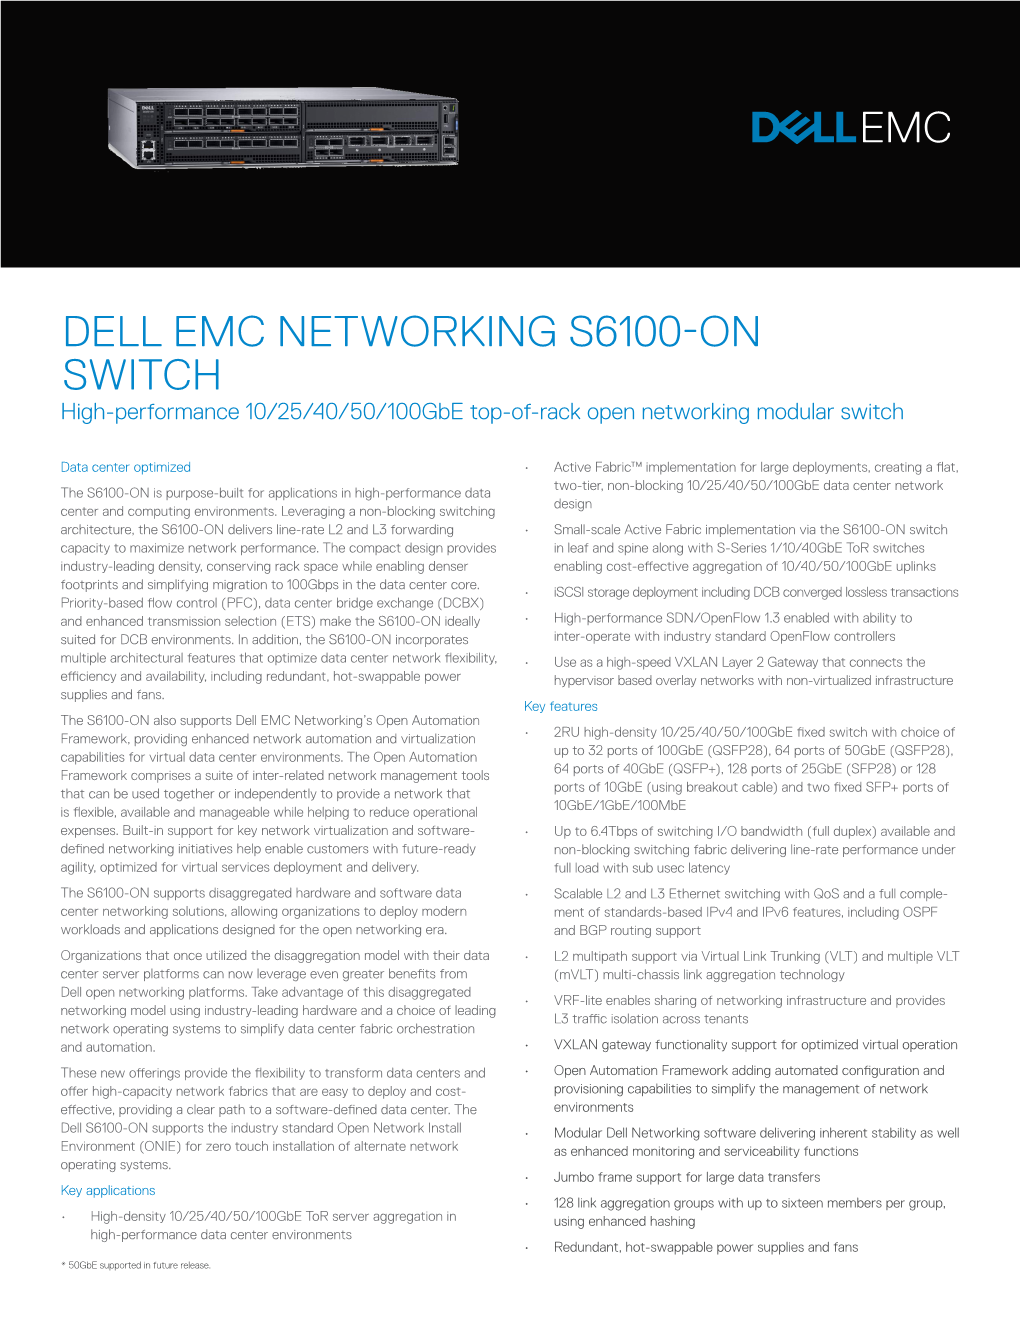 DELL EMC NETWORKING S6100-ON SWITCH High-Performance 10/25/40/50/100Gbe Top-Of-Rack Open Networking Modular Switch